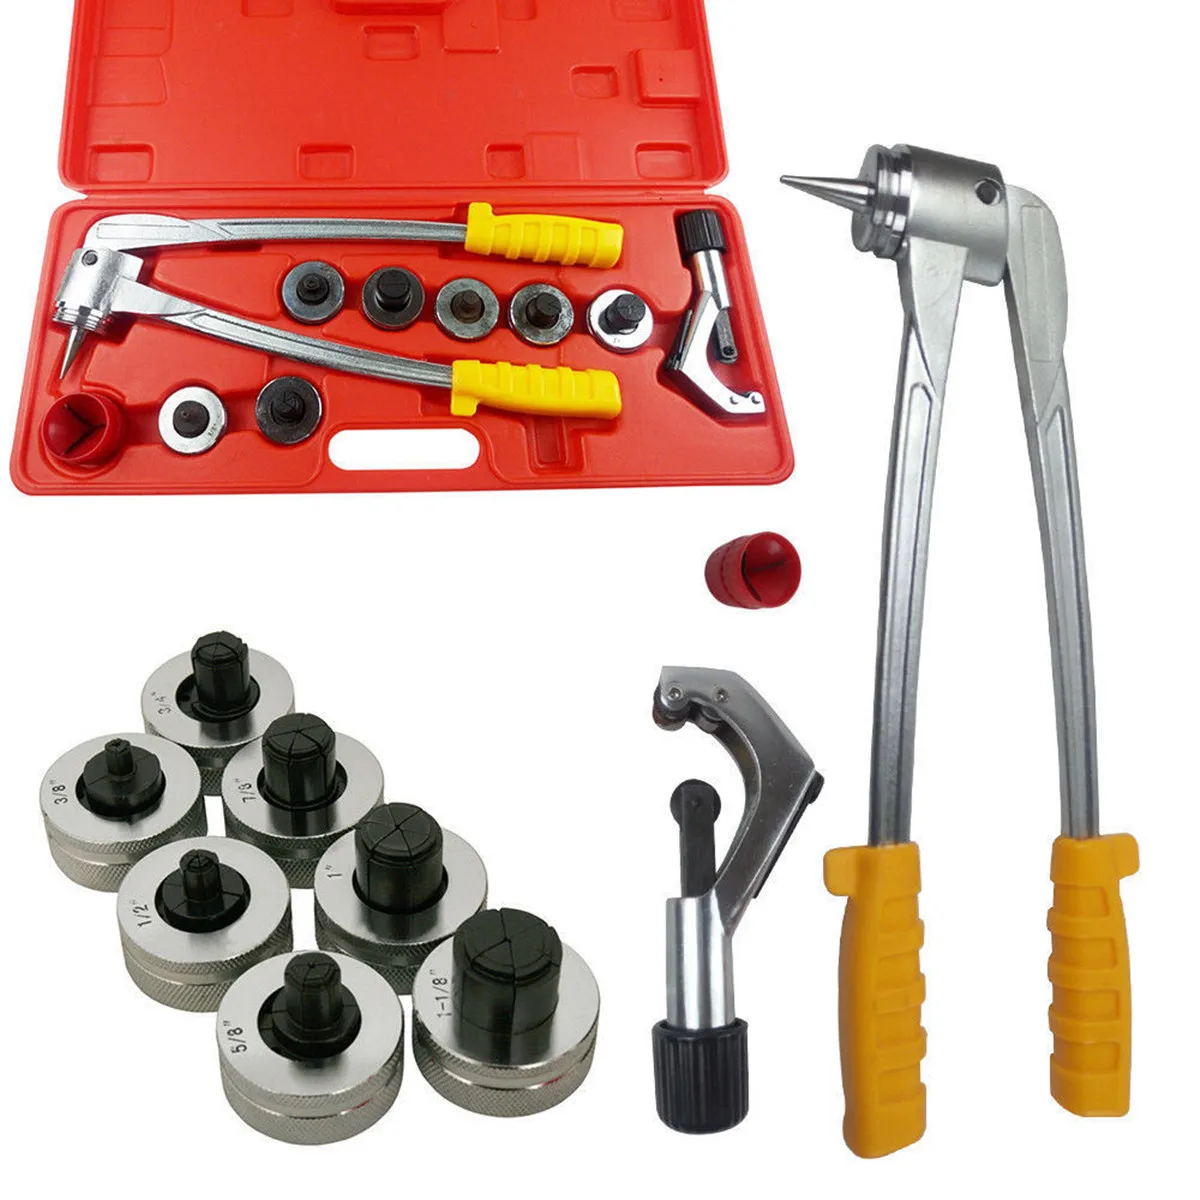 Plumbing Pipe Expander Tool 7 Lever HVAC Hydraulic Copper Heads Tube Swaging Kit 